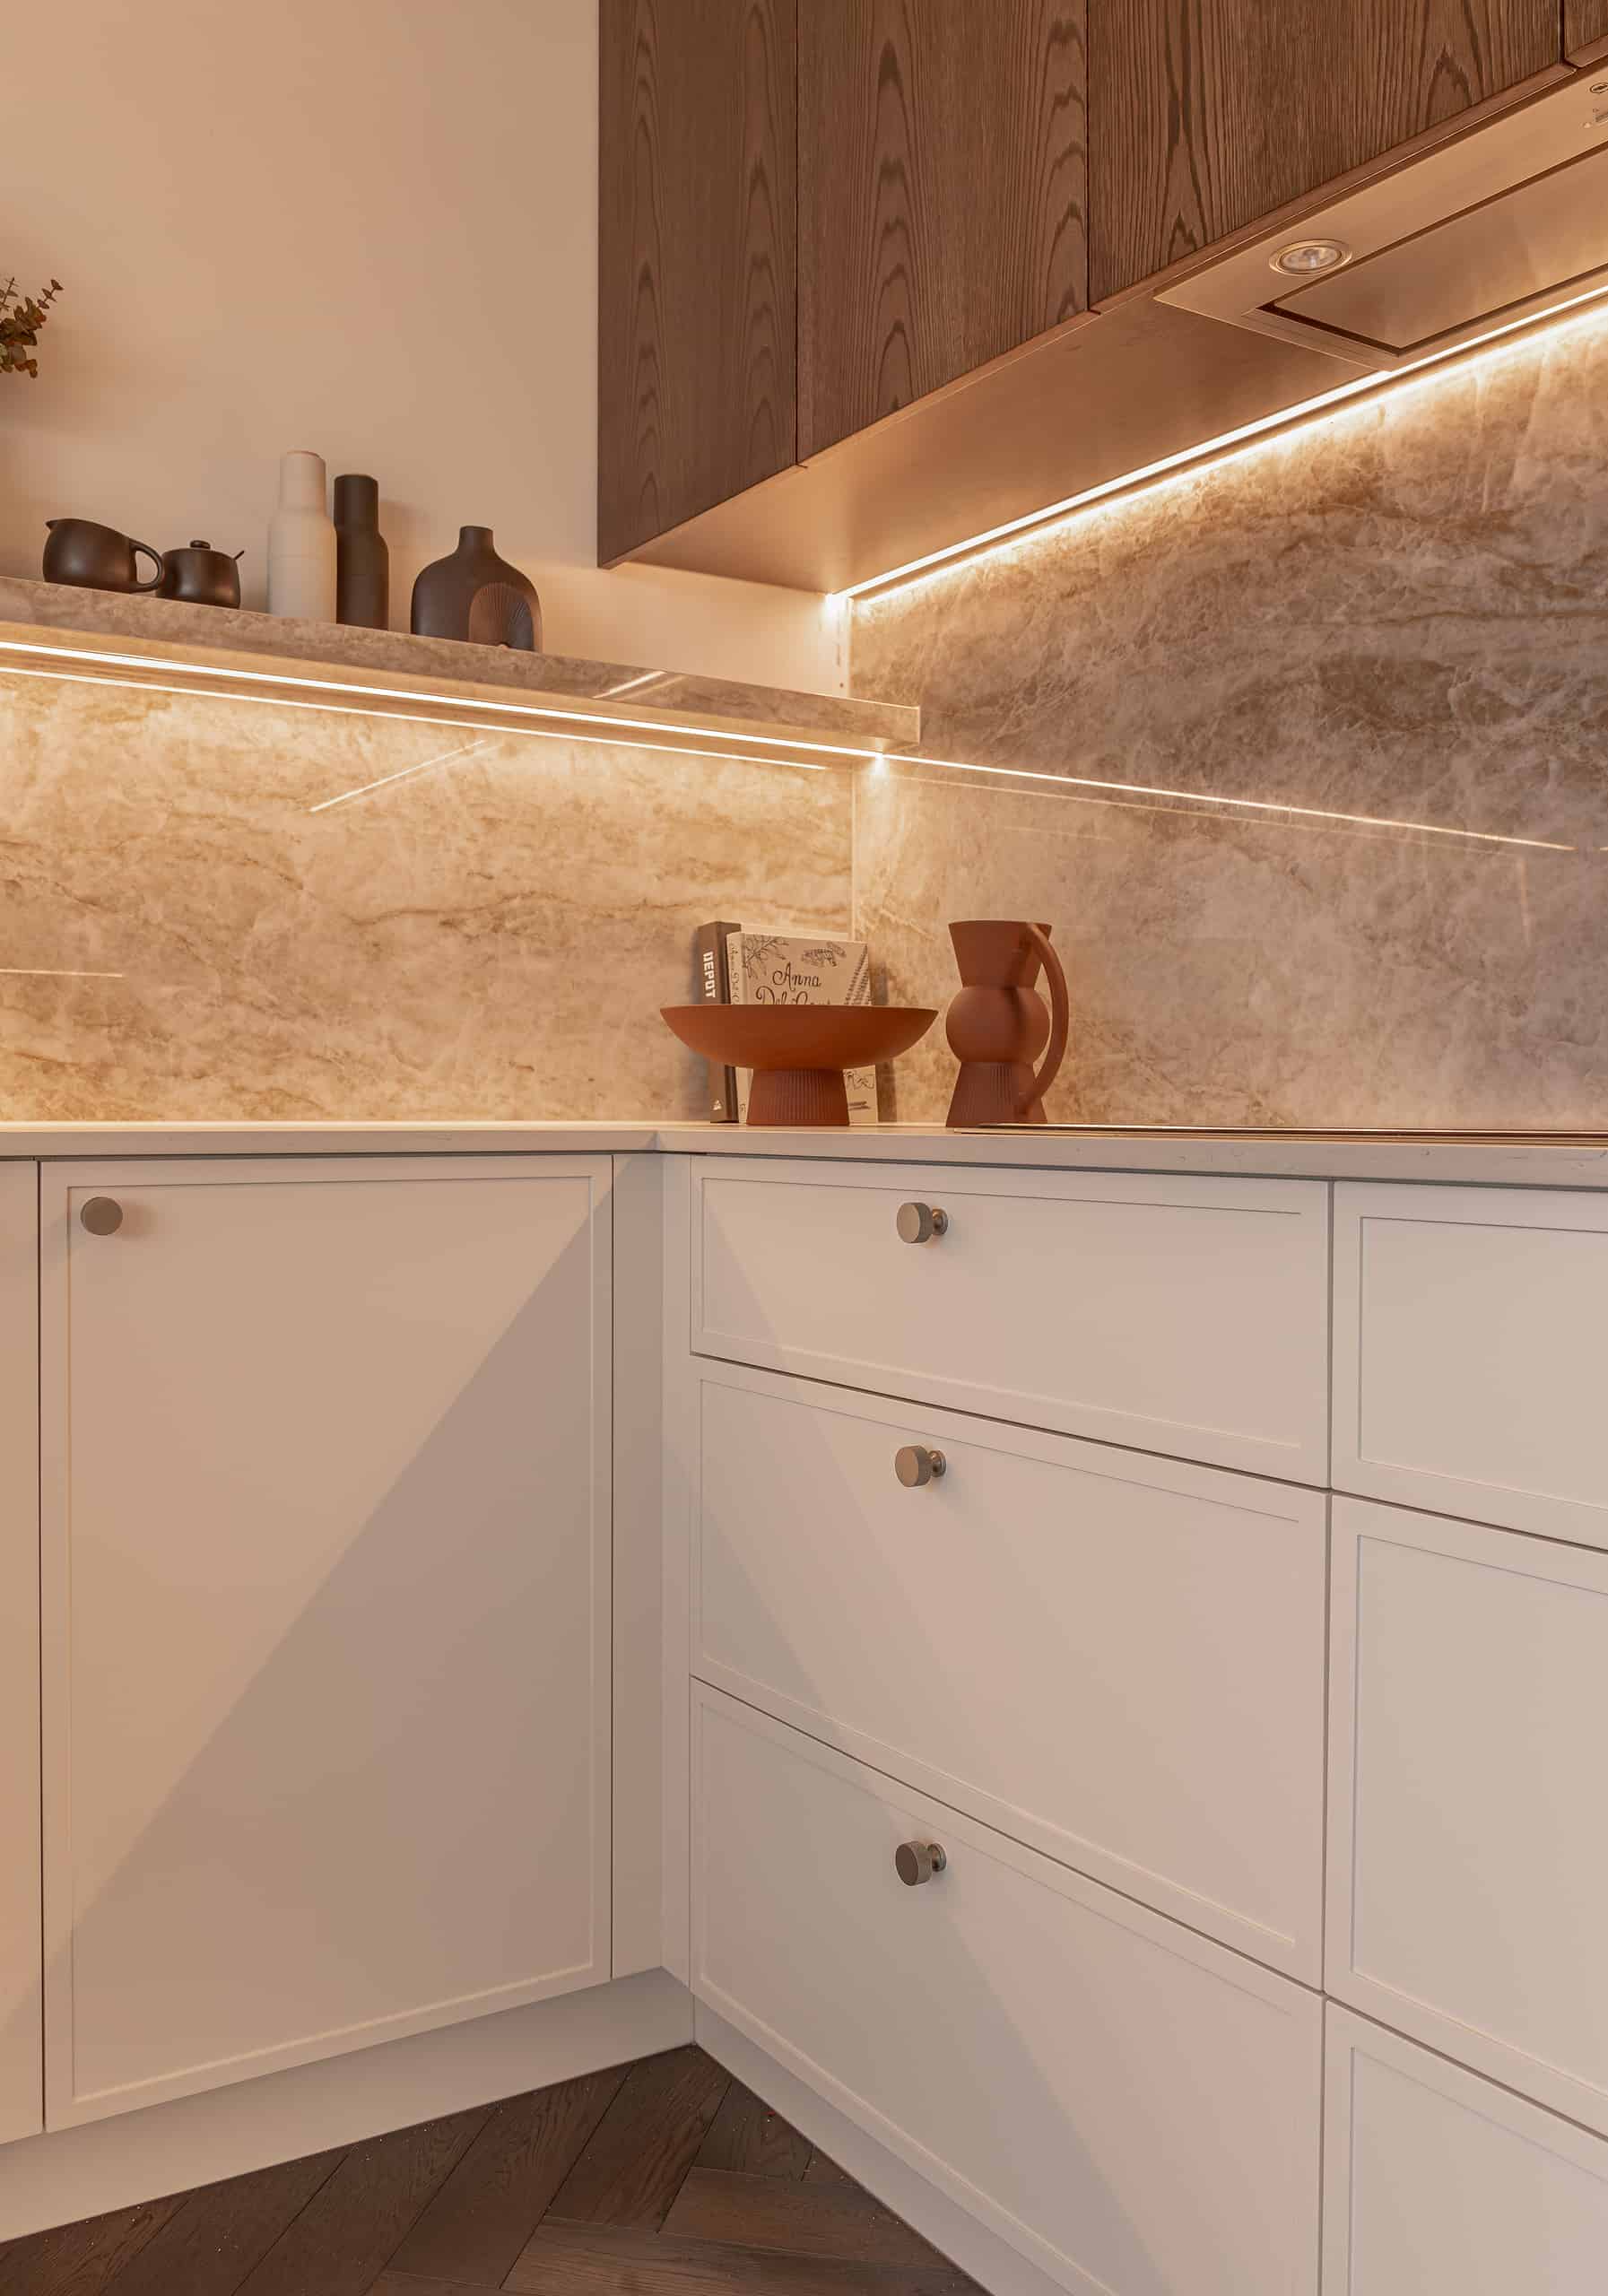 A cream kitchen with marble splashback, traditional cabinets closed and brown upper cabinetry